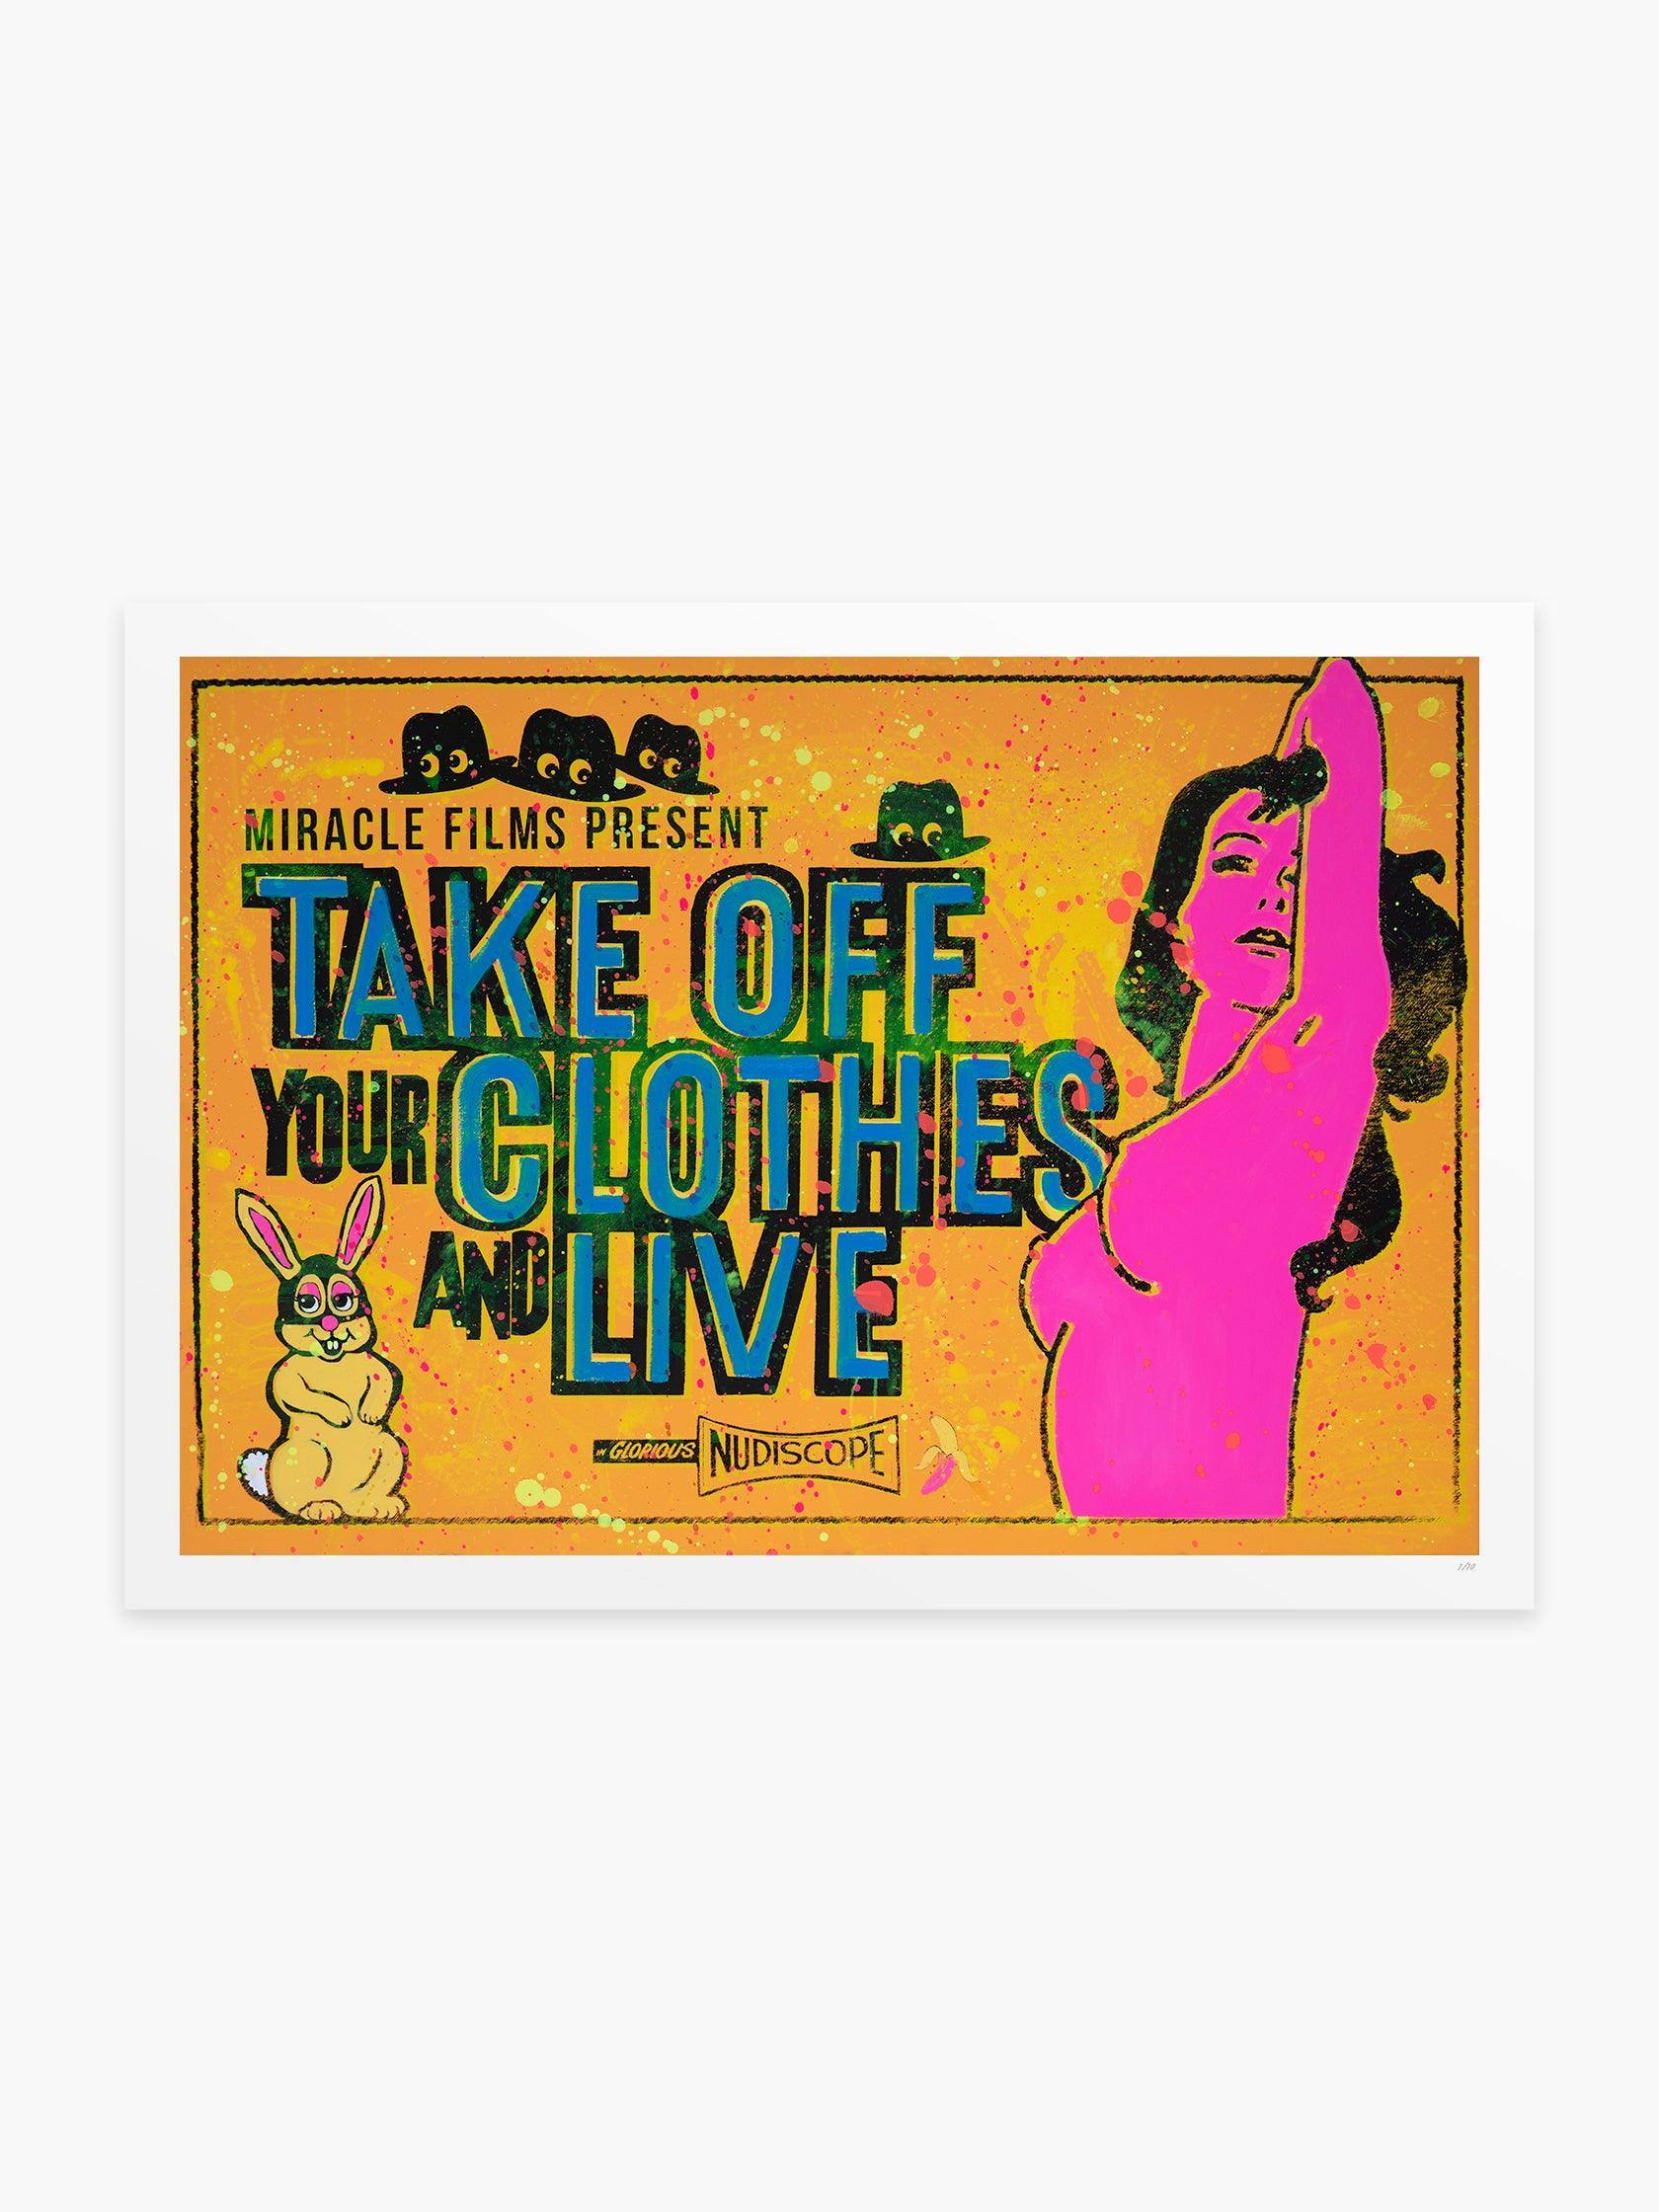 Take off Your Clothes and Live by Shuby - Mankovsky Gallery